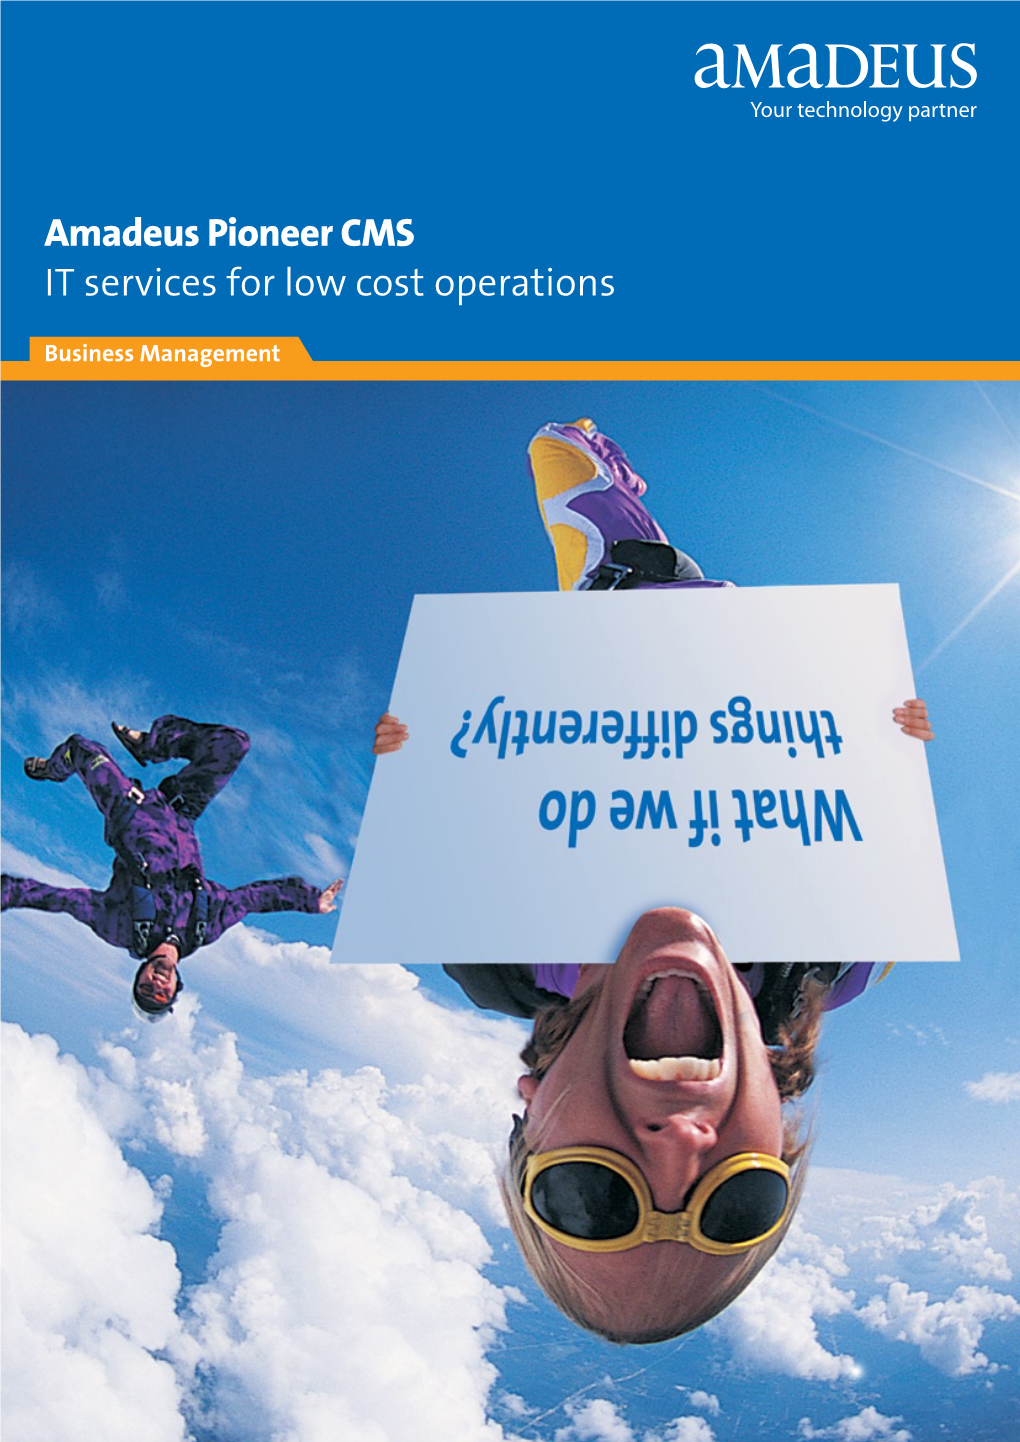 Amadeuspioneer CMS IT Services for Low Cost Operations